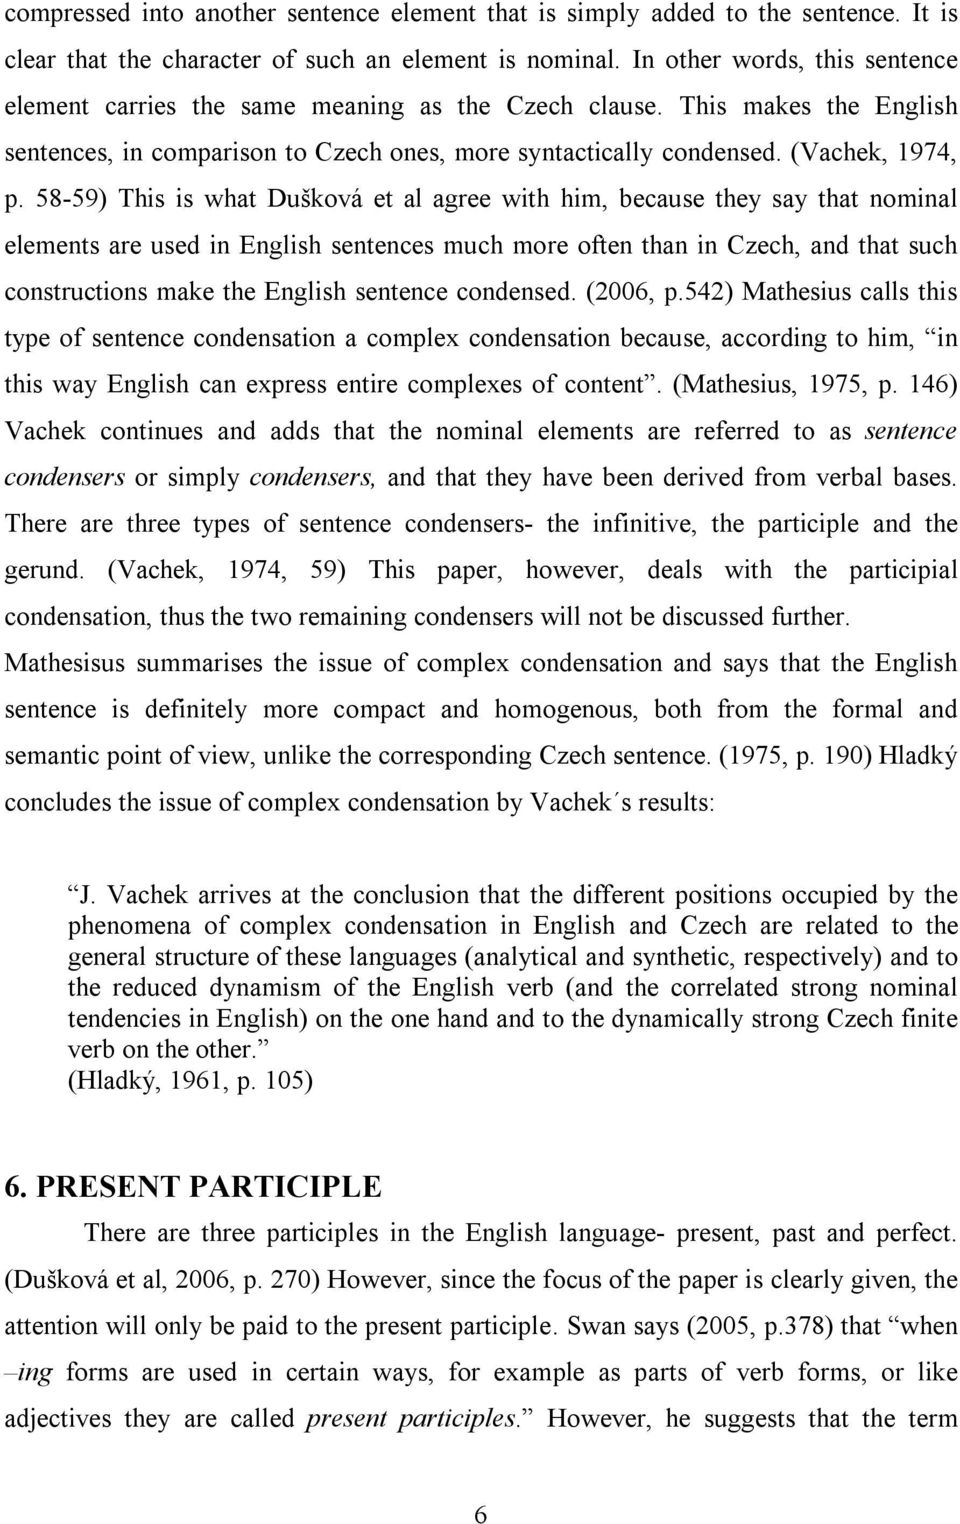 58-59) This is what Dušková et al agree with him, because they say that nominal elements are used in English sentences much more often than in Czech, and that such constructions make the English